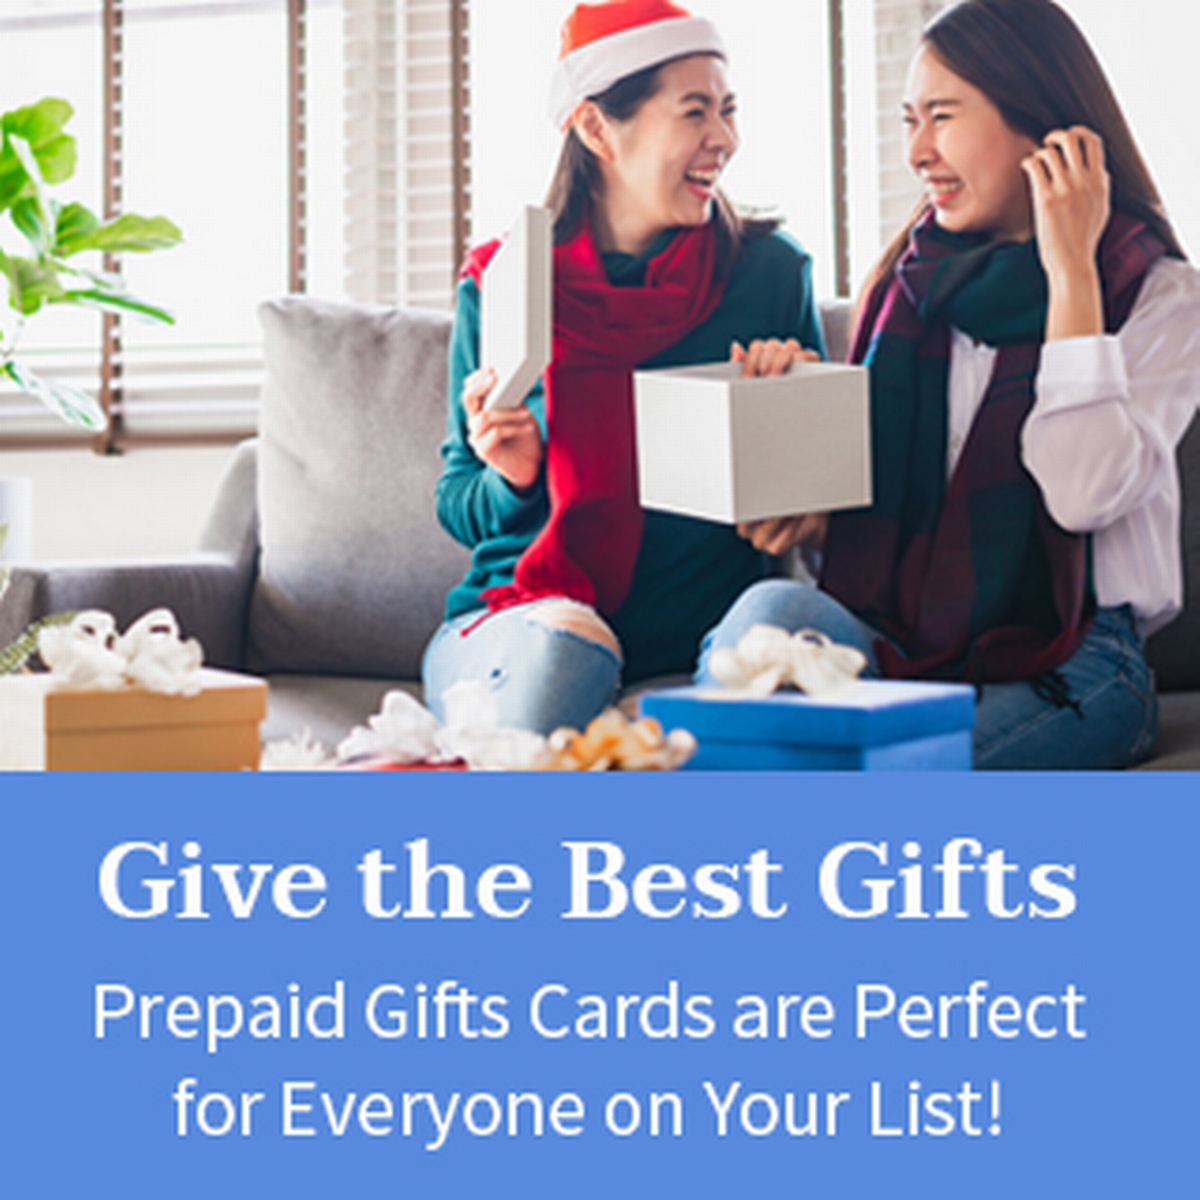 Give the best gifts -- prepaid cards are perfect for everyone on your list!